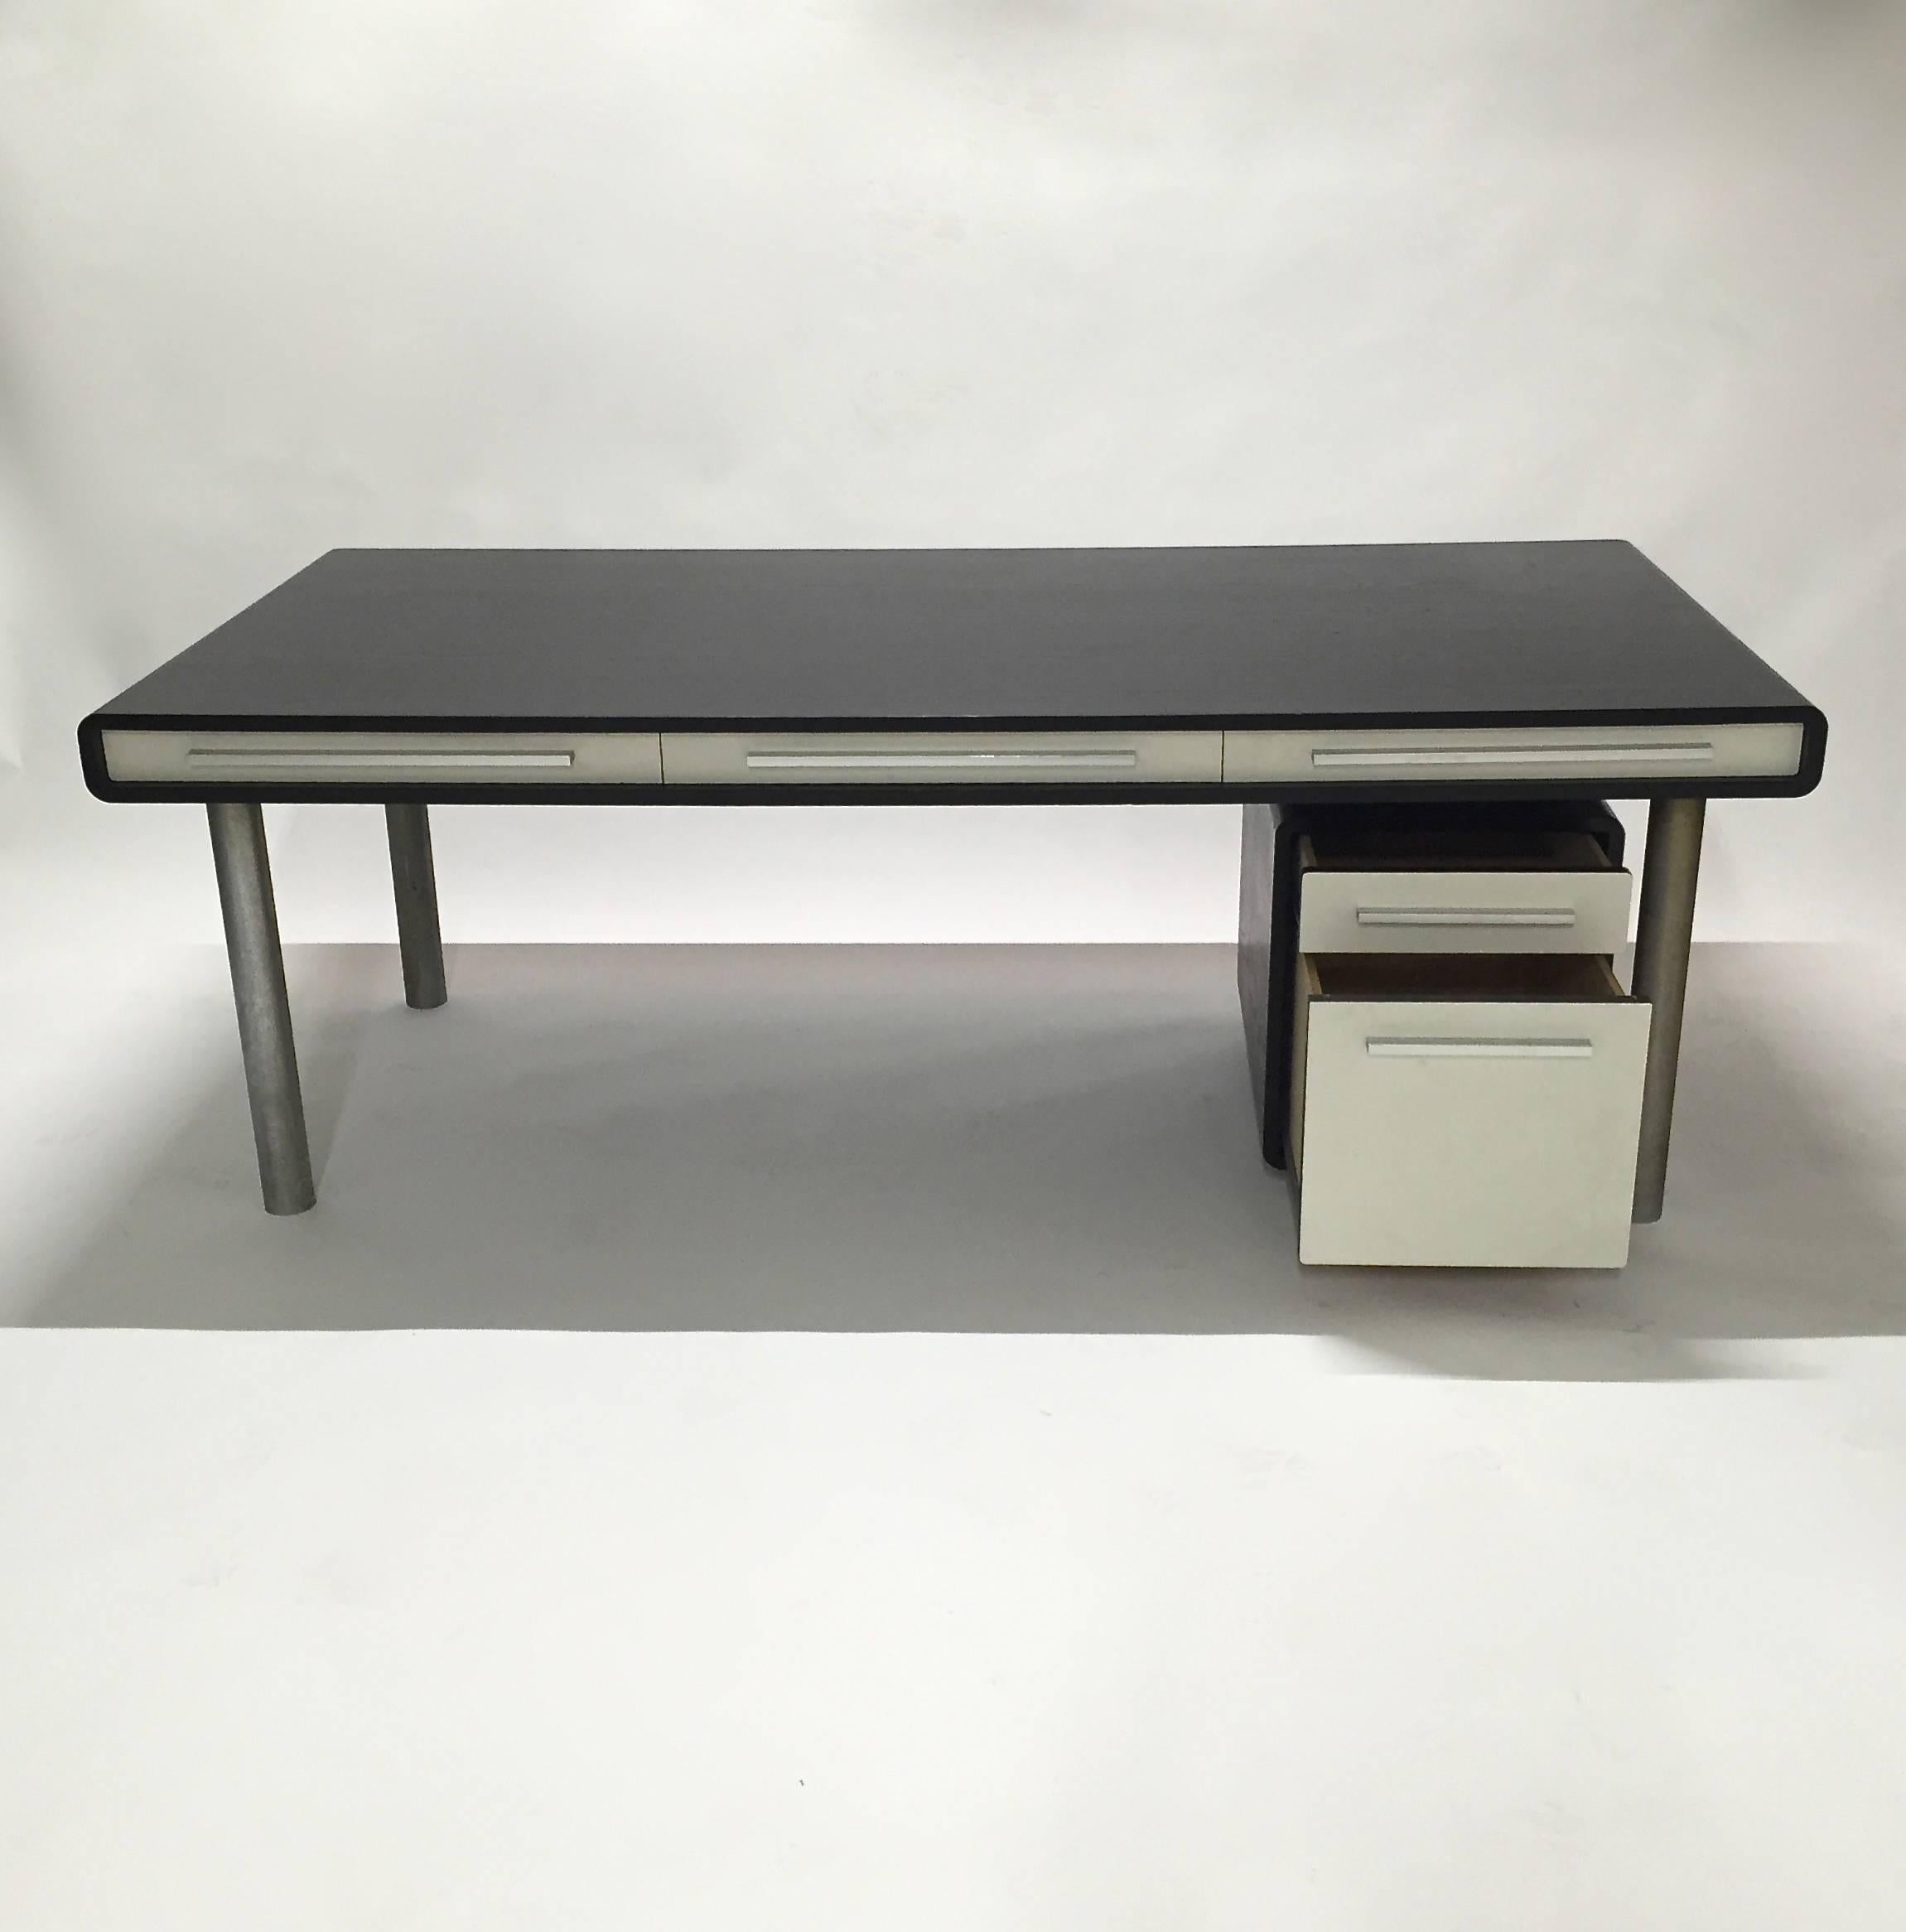 Three-drawer executive desk with an ebonized wooden top, steel legs, aluminium handles, and white textured laminate detail. 
Storage or filing cabinet measurements: 53.5 cm H x 42 cm W x 60 cm D.